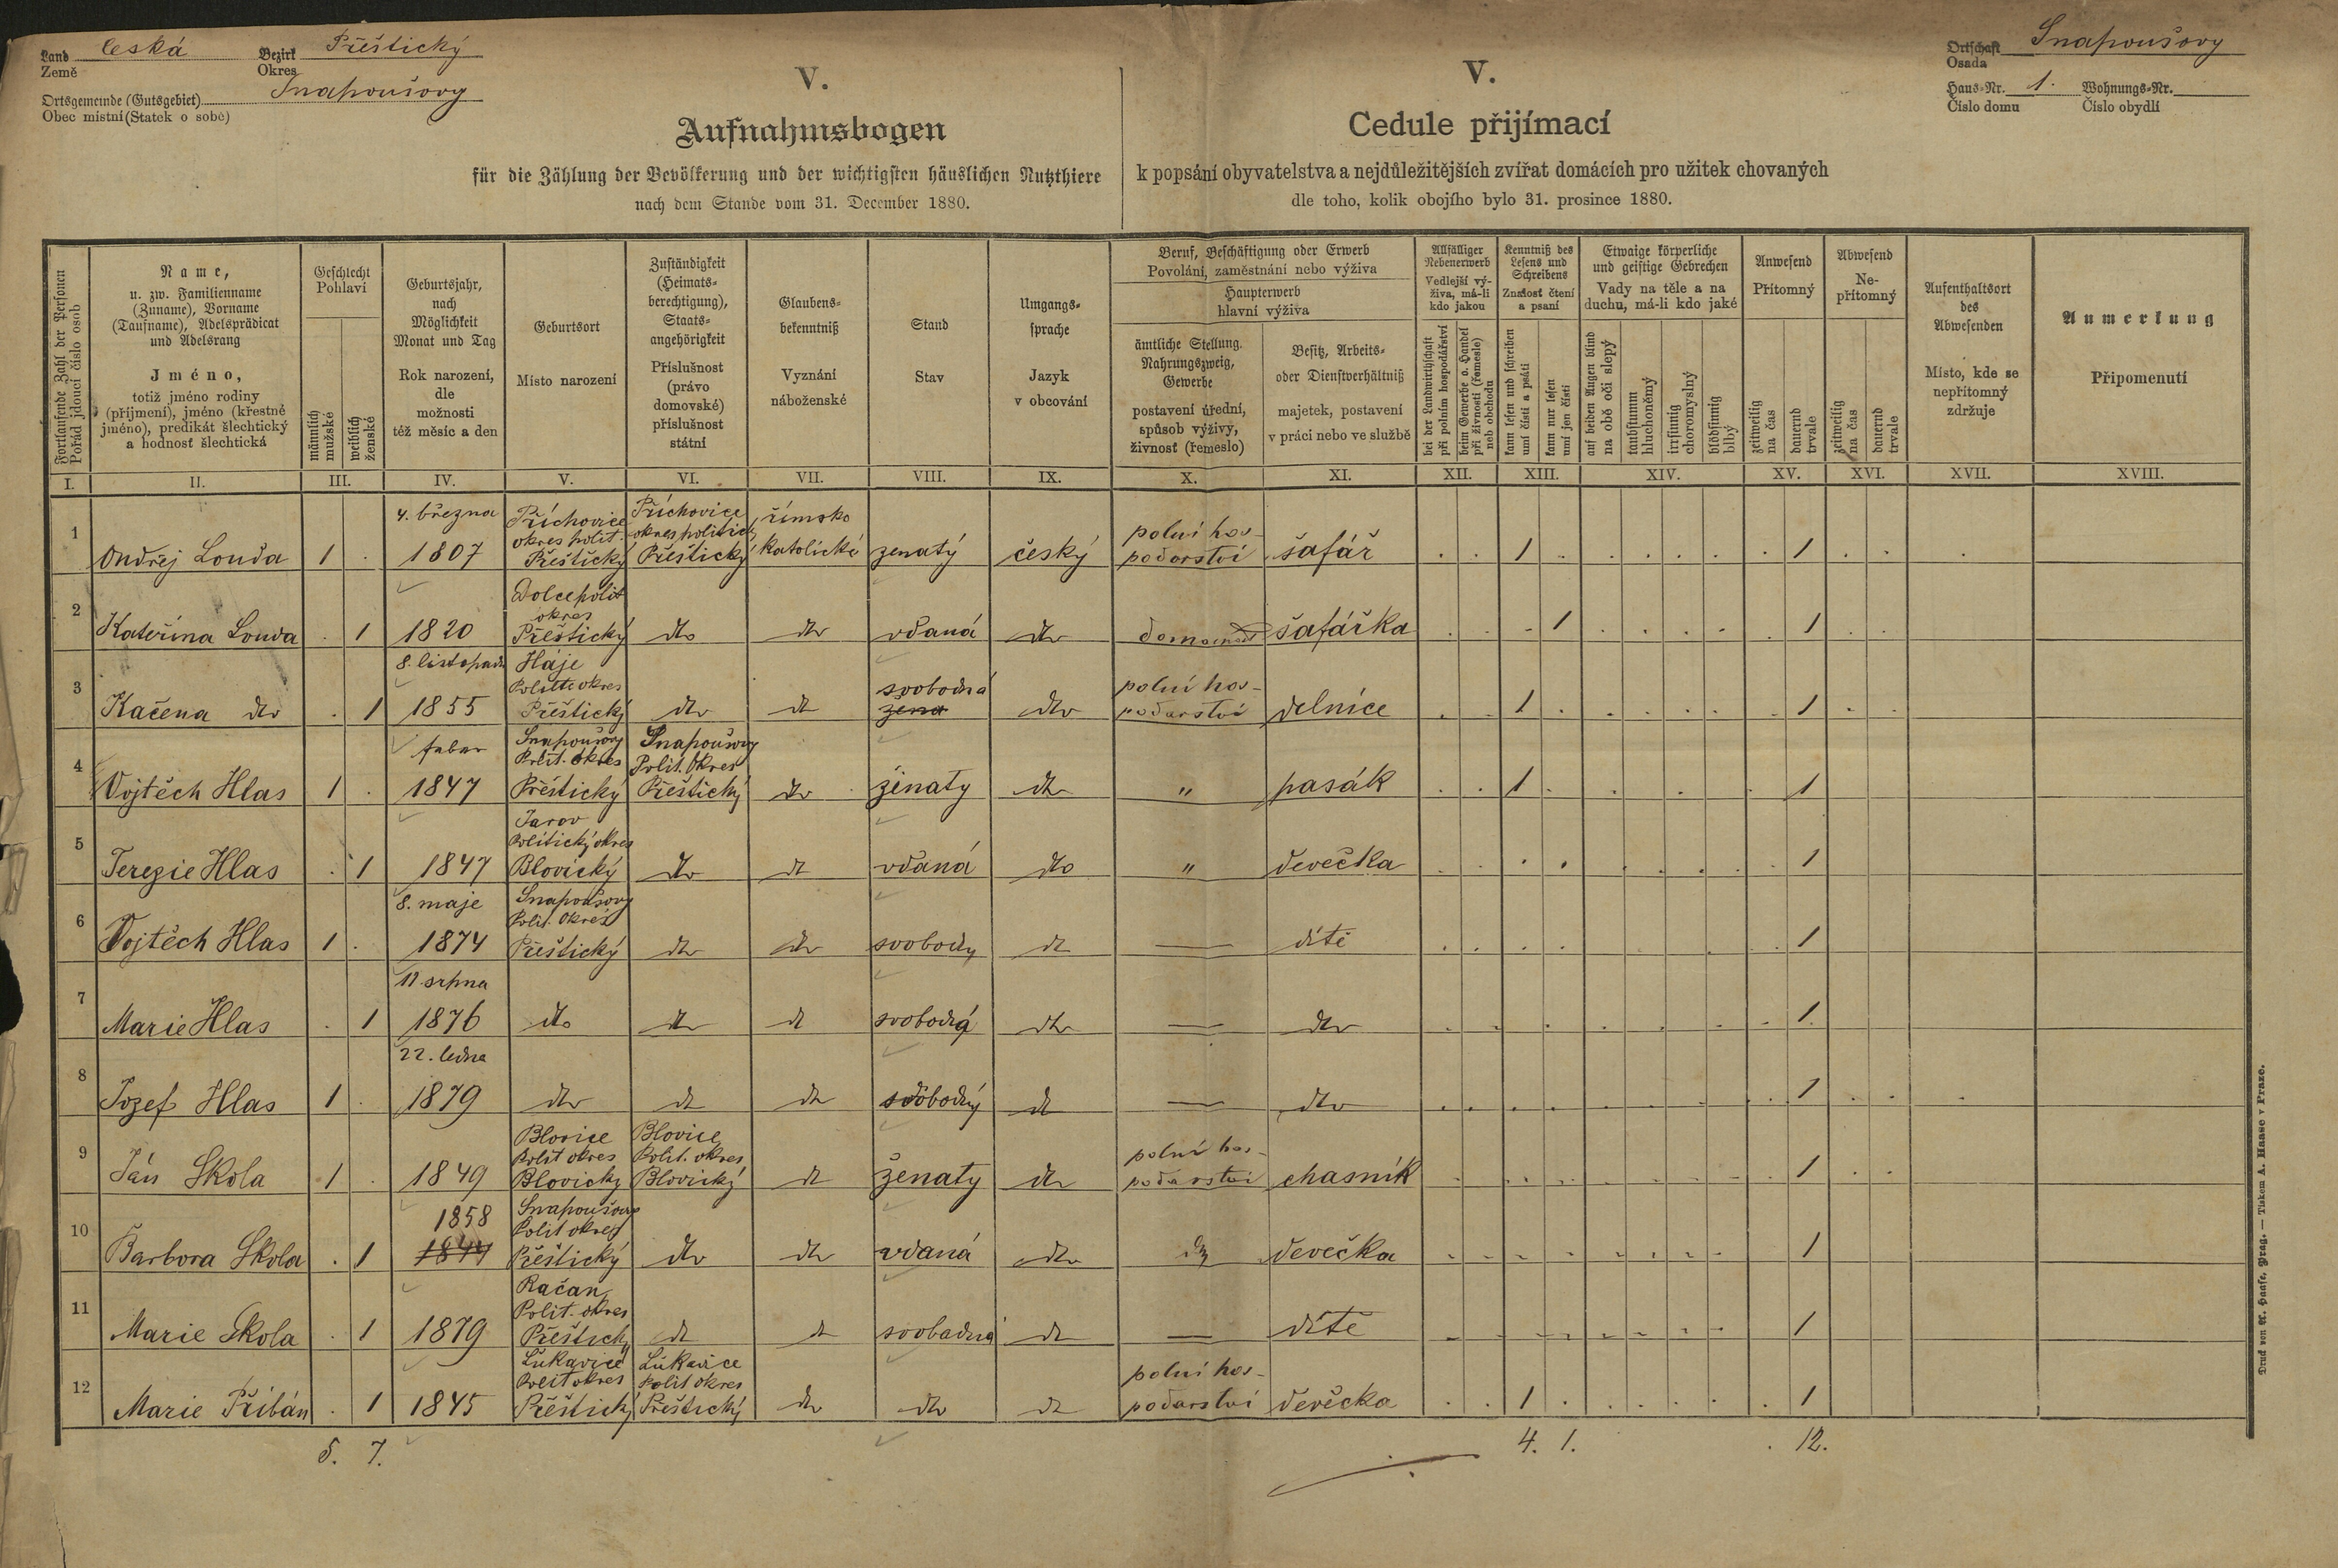 1. soap-pj_00302_census-1880-snopousovy-cp001_0010